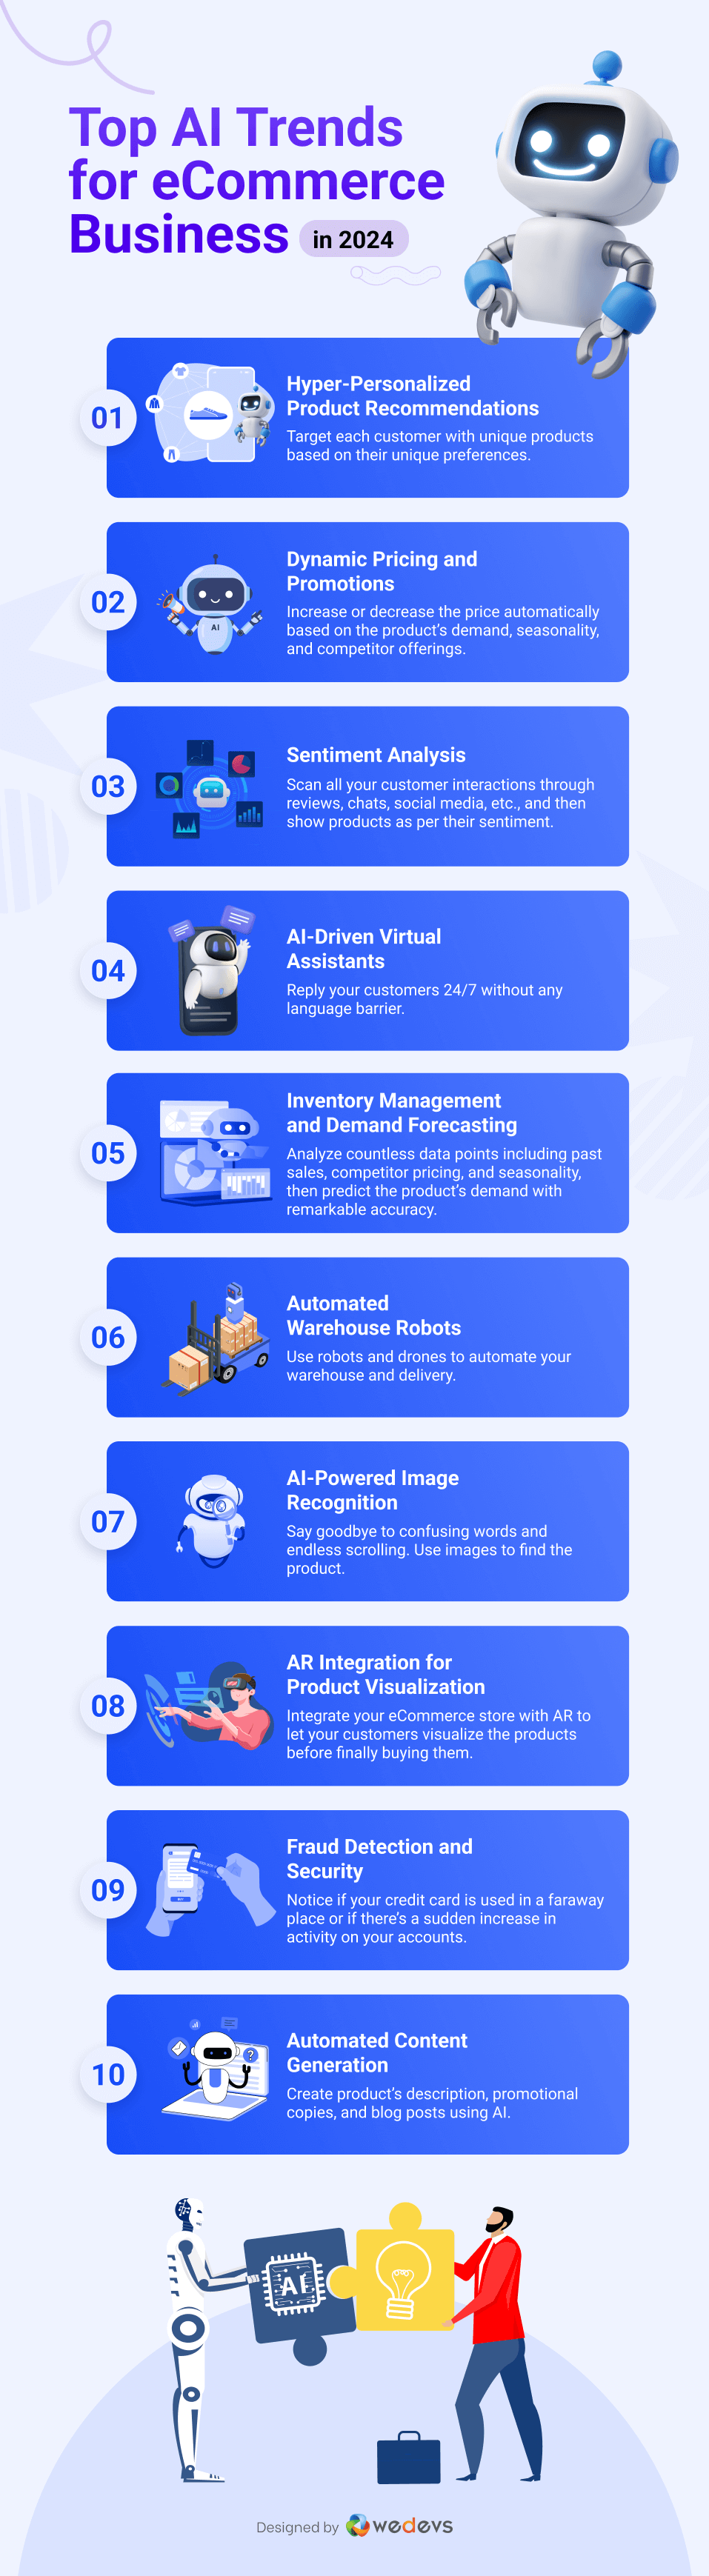 This is an infographic that shows top 10 AI trends for eCommerce business